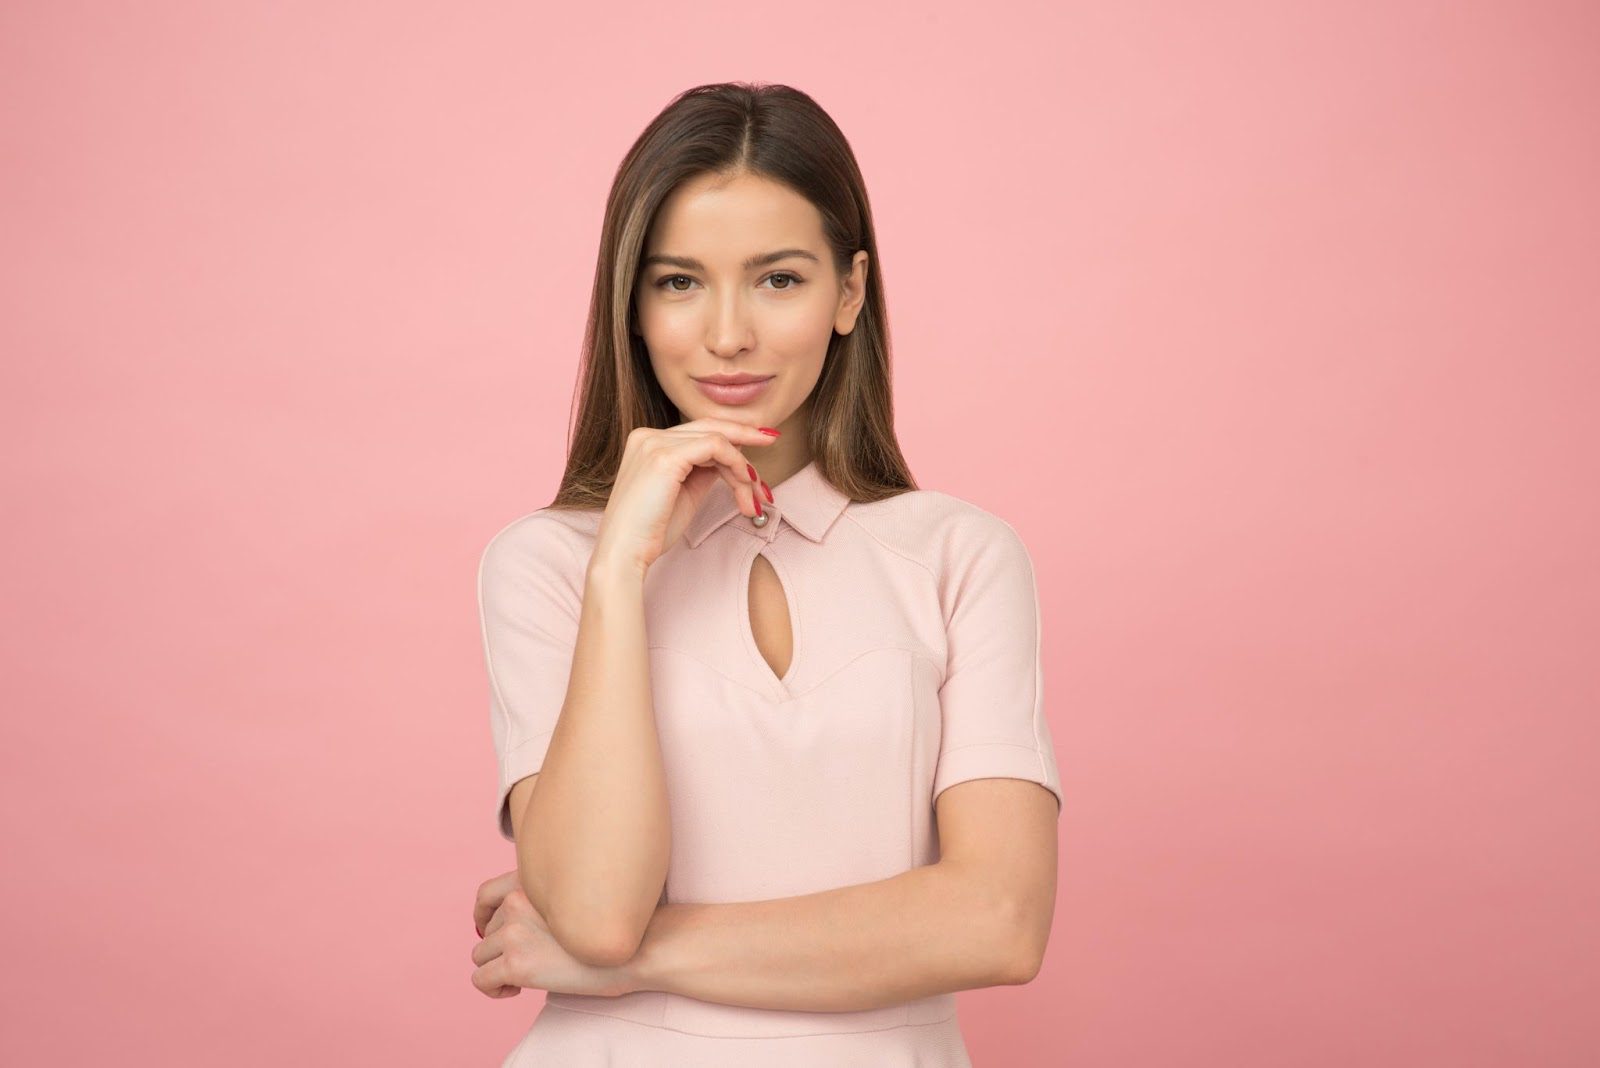 Create a young woman in a pink dress posing with her hand on her chin, while she embraces the journey to create a happy and fulfilling life for herself.